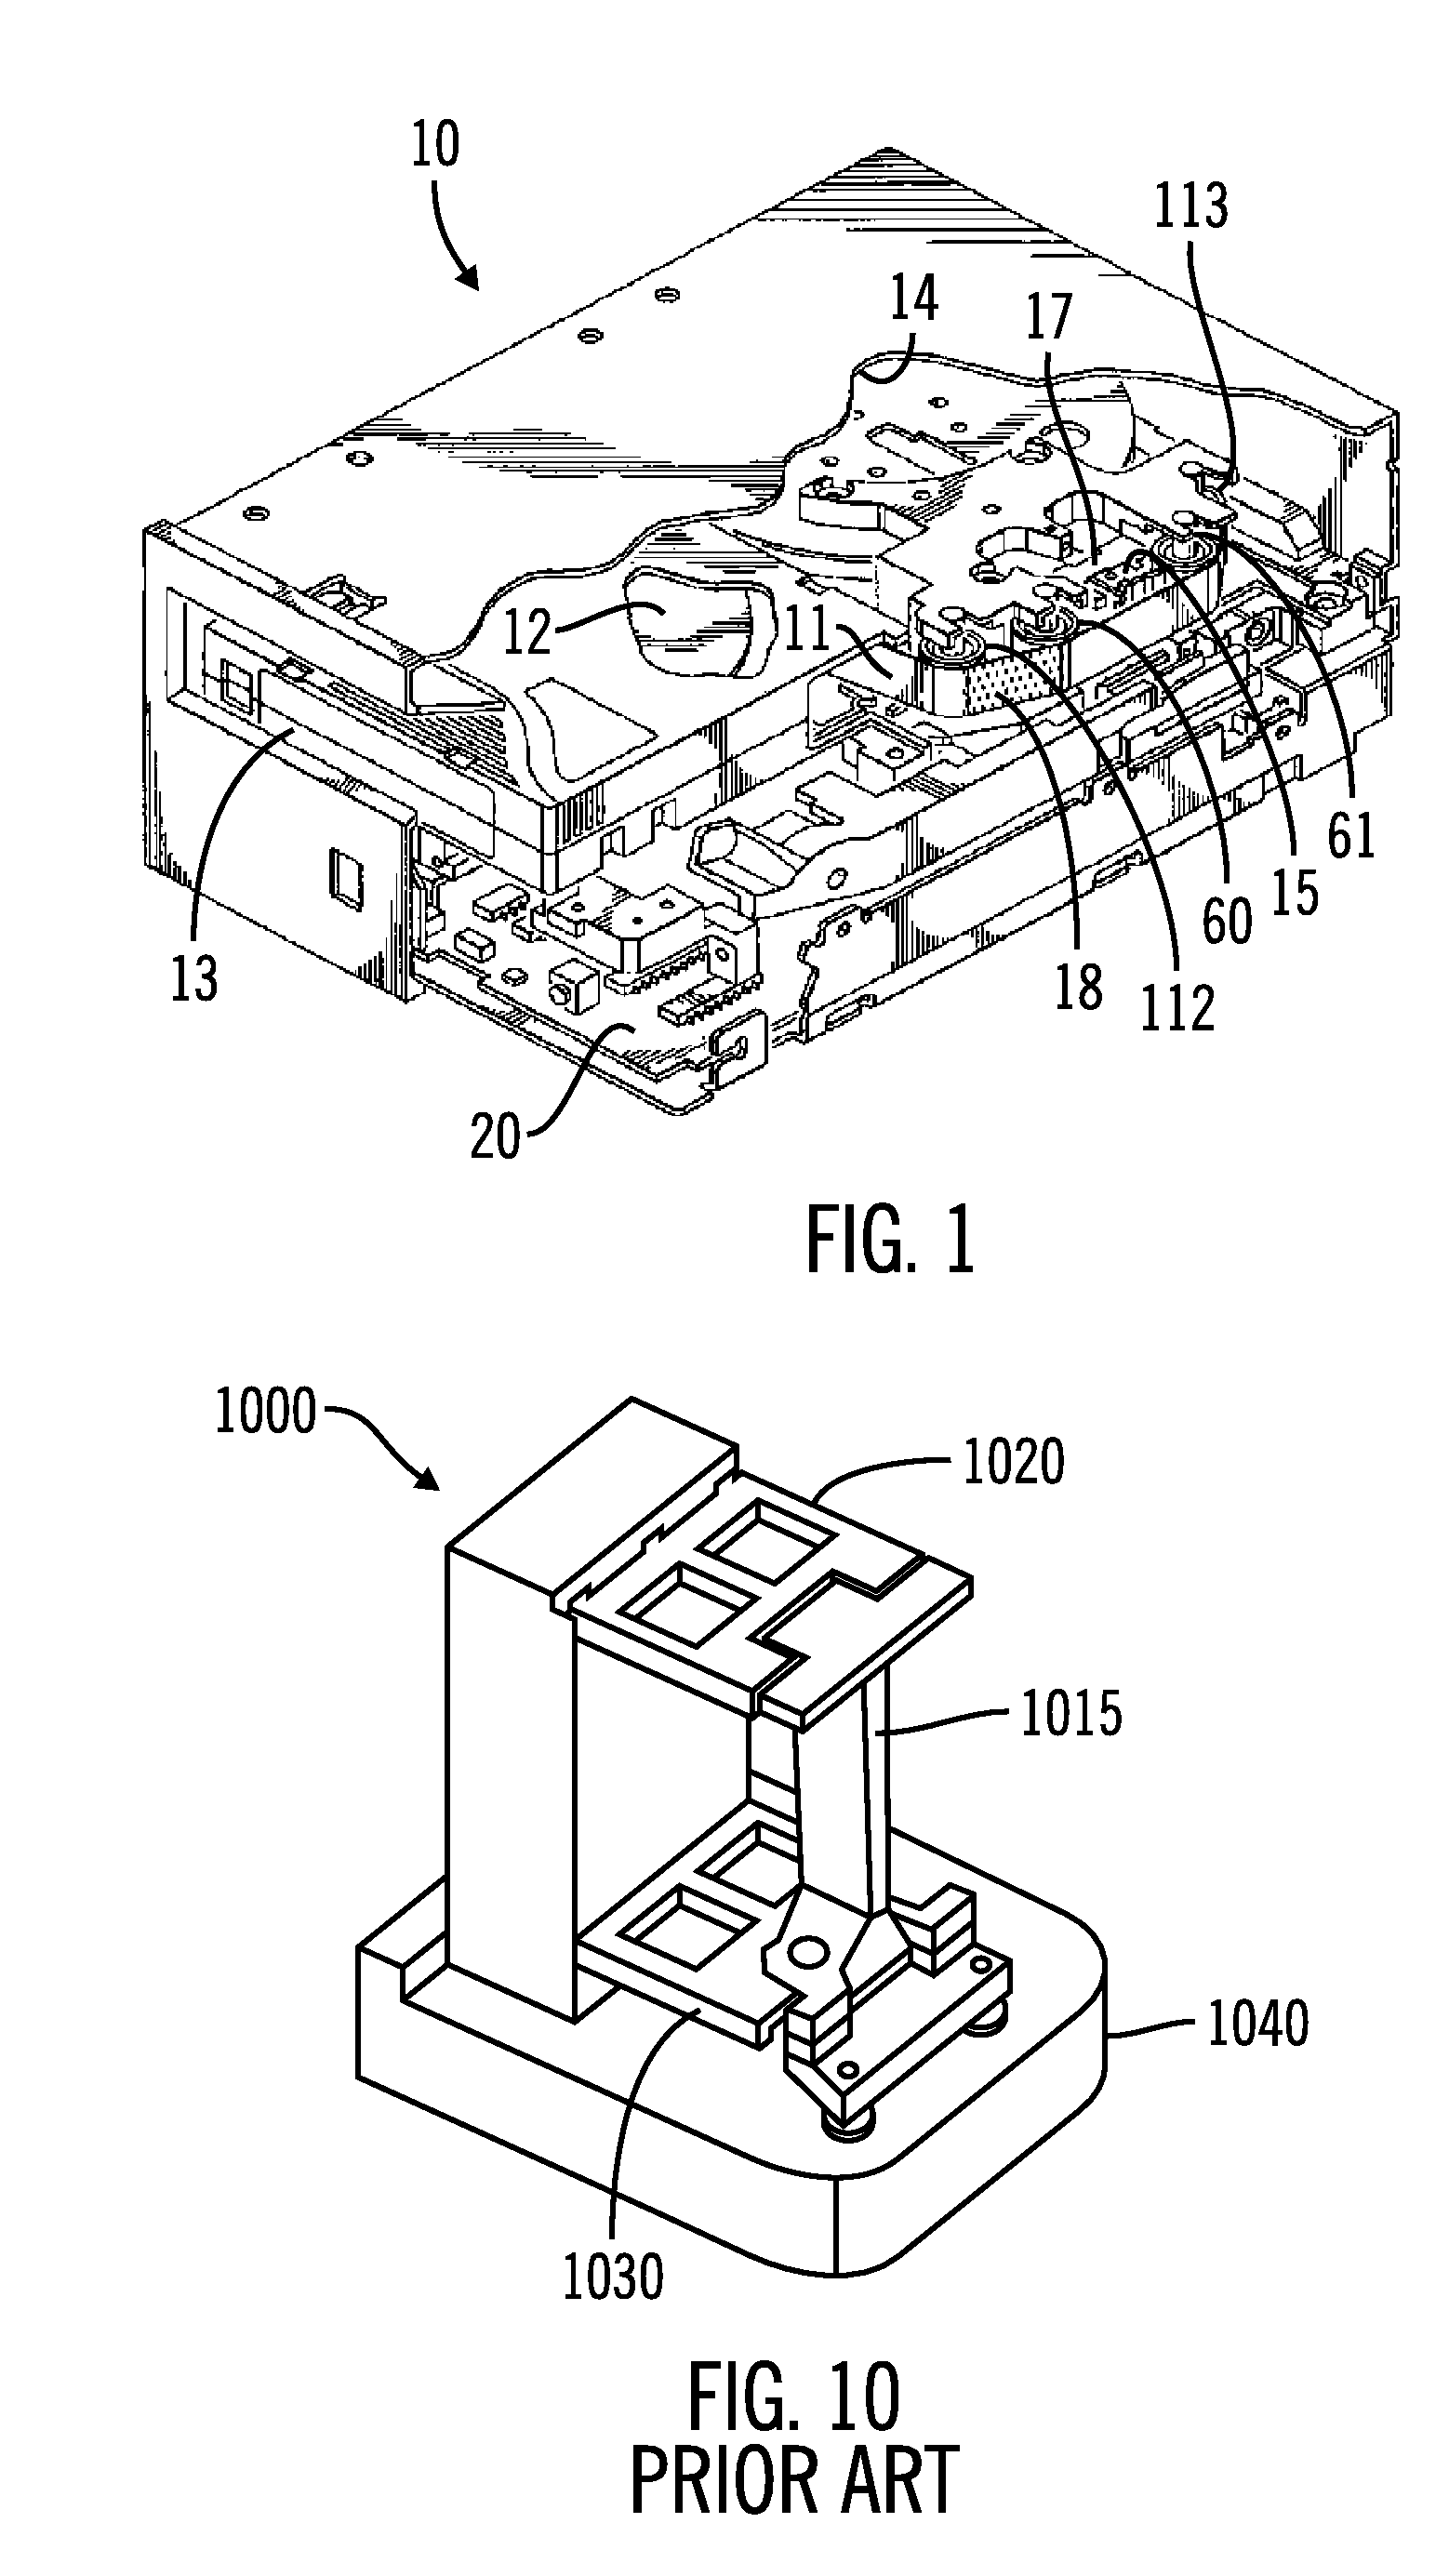 Moving magnet actuation of tape head